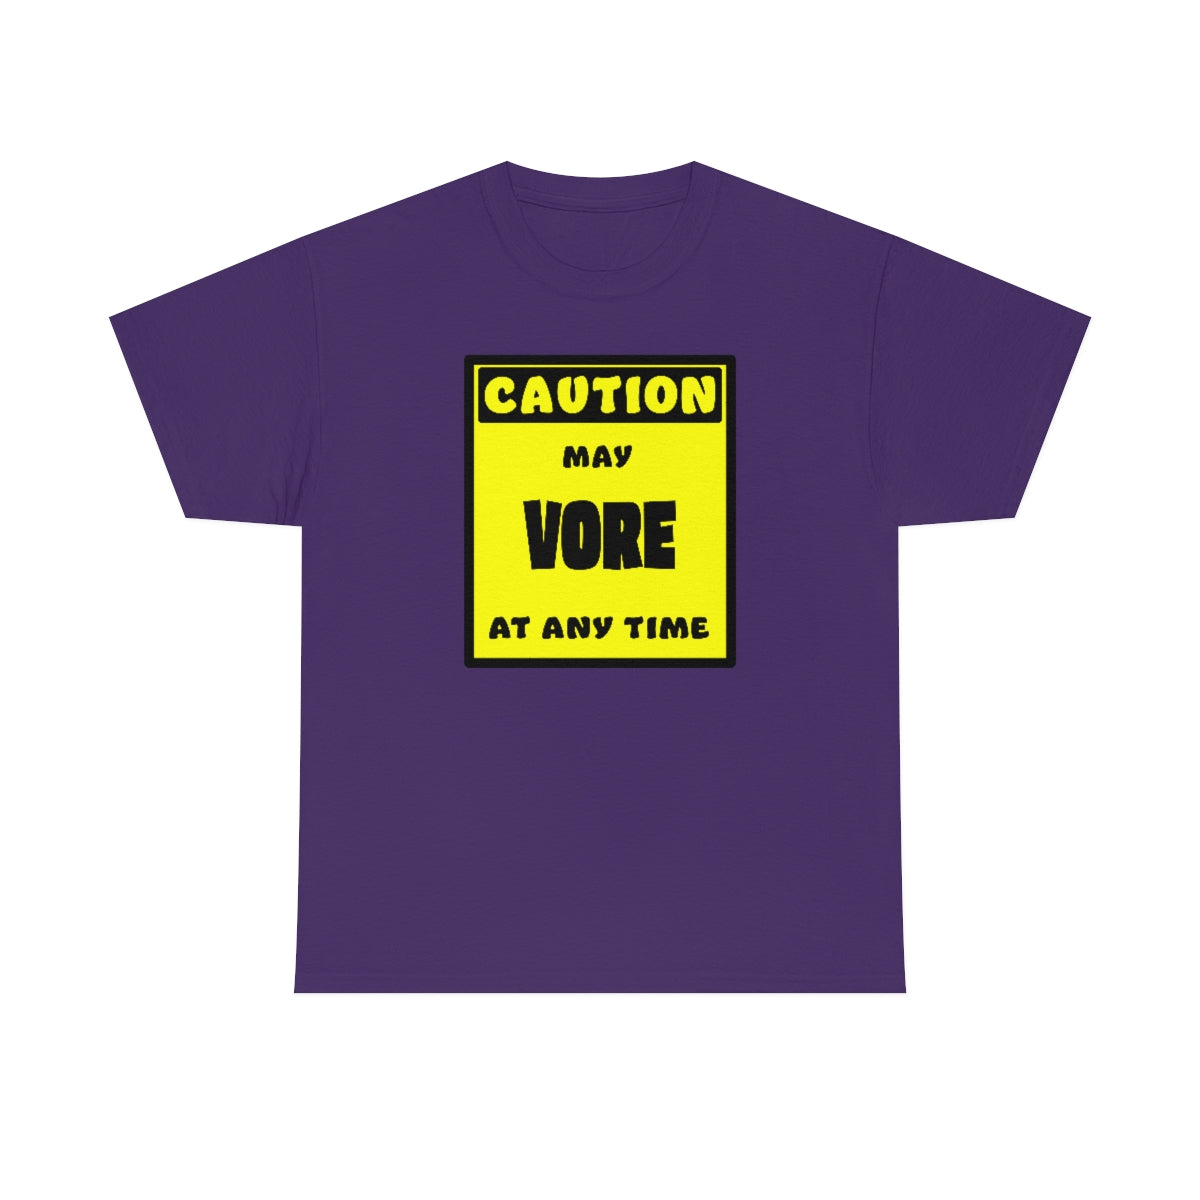 CAUTION! May VORE at any time! - T-Shirt T-Shirt AFLT-Whootorca Purple S 